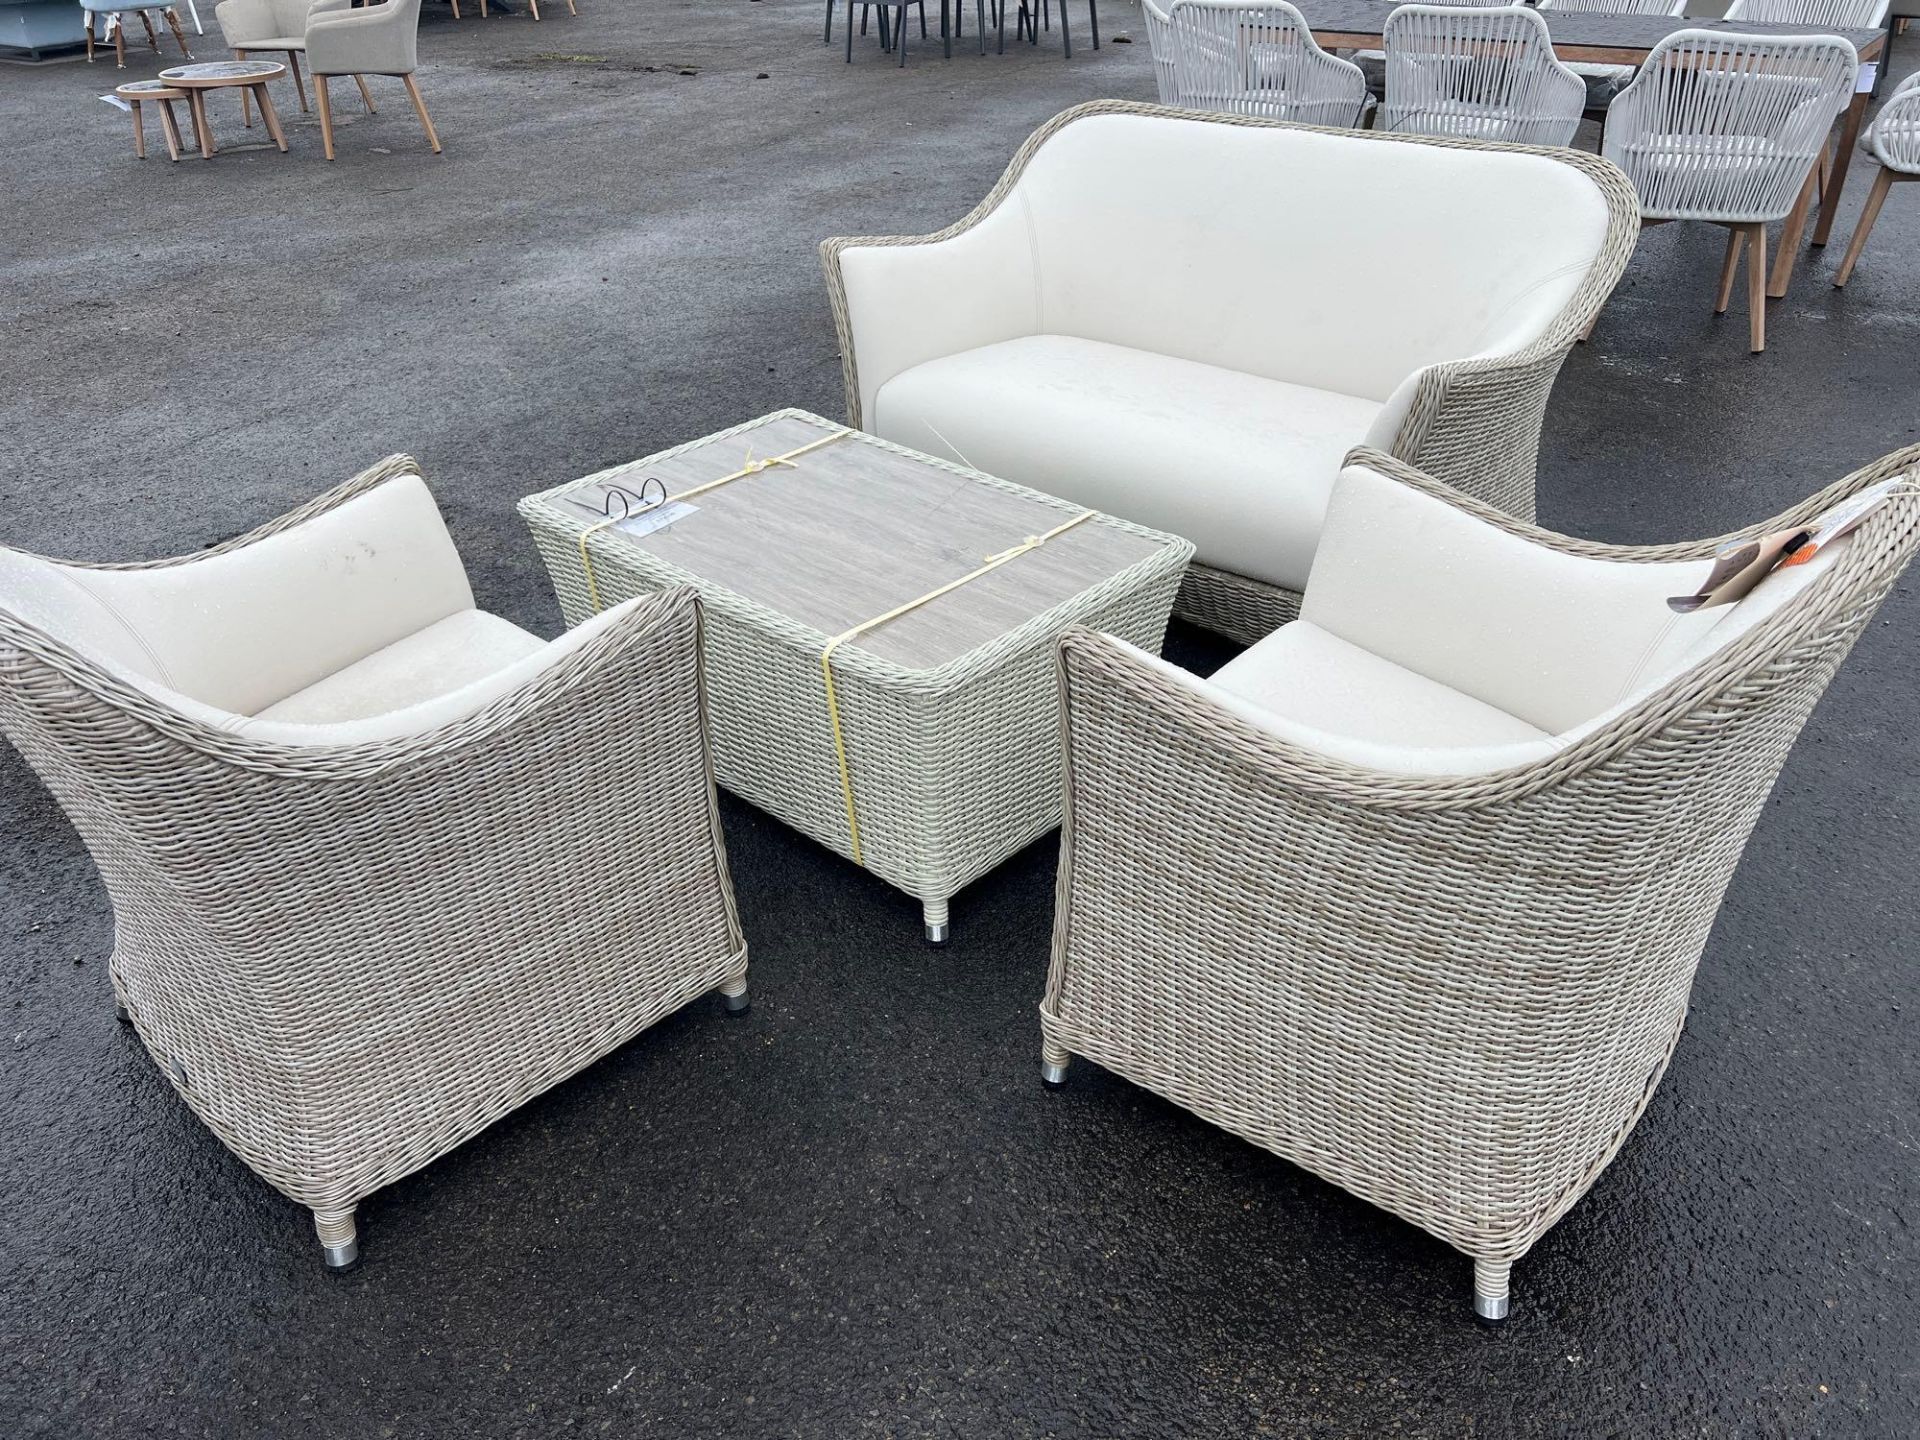 A141 Monte Carlo 2 Seat Sofa 2 chairs and table